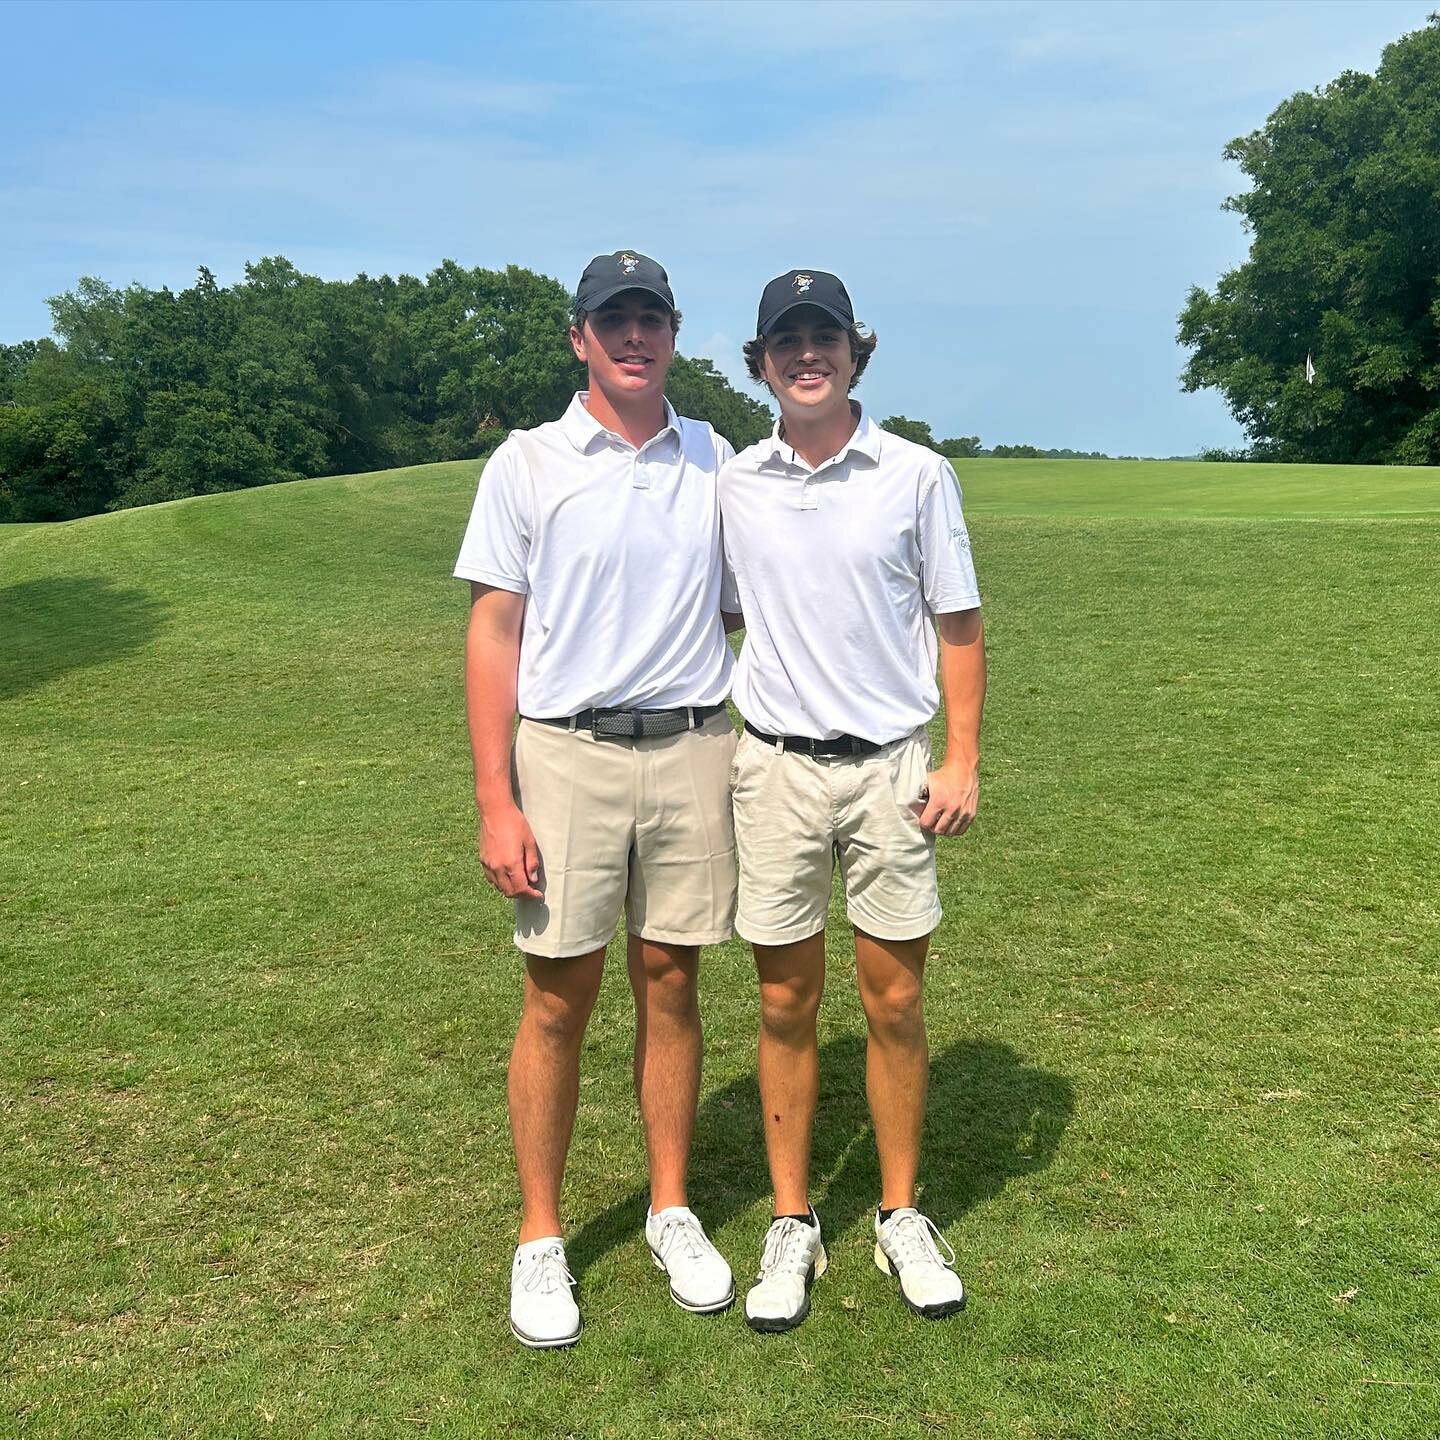 Fairhope state qualifiers Trip Duke and Brody Quattlebaum represented the Pirates at the RTJ Grand National Golf Course in Opelika during the Alabama High School Athletic Association’s Class 7A state tournament. Both recorded top-10 individual finishes where Duke recorded a two-round score of 144 for fourth and Quattlebaum was not far behind at 148 for ninth.